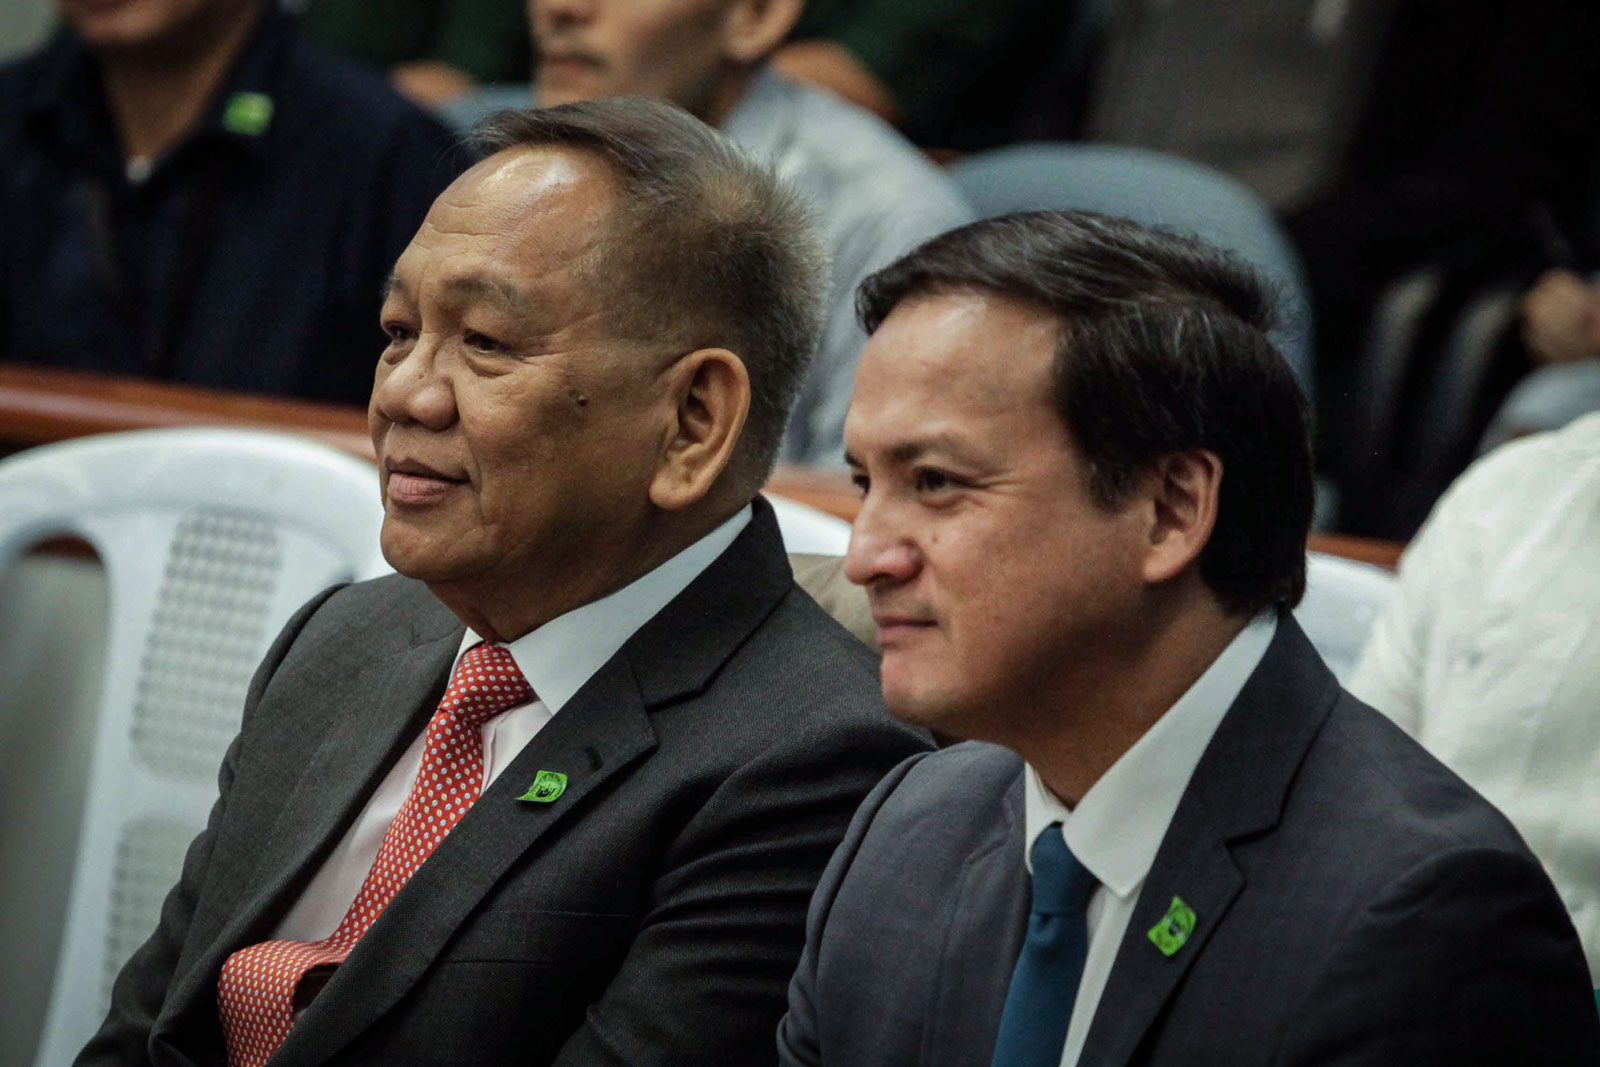 JUDICIARY. Chief Justice Diosdado Peralta and Court Administrator Midas Marquez during the Judiciary budget hearing at the Senate on November 20, 2019. Photo by KD Madrilejos/Rappler 